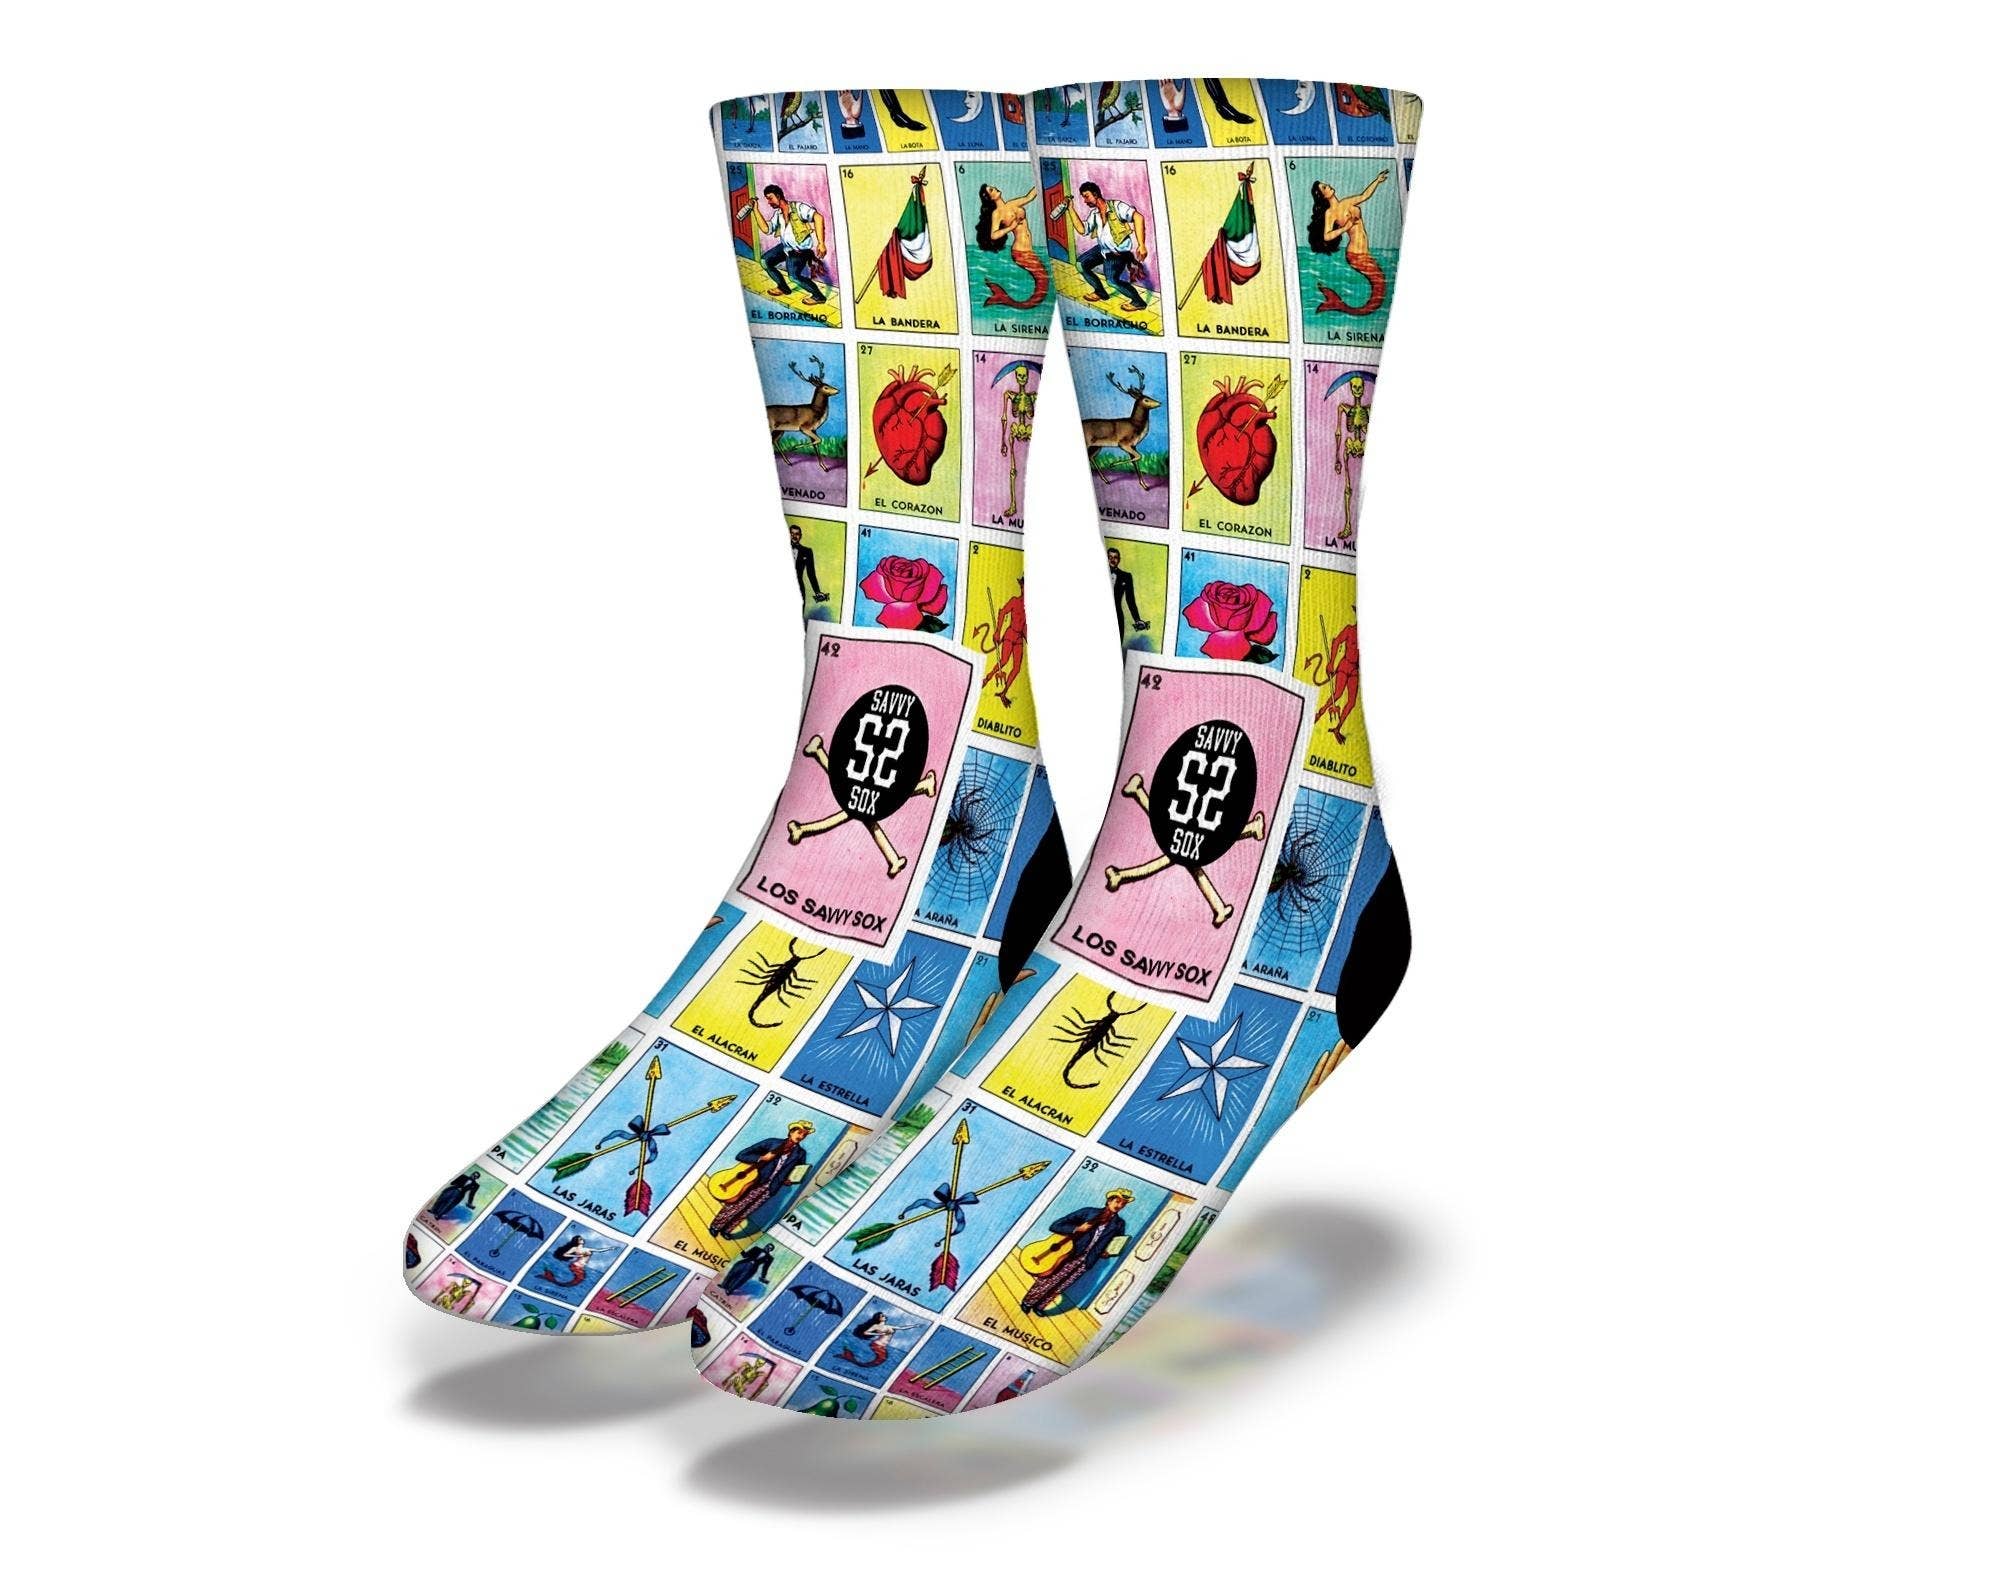 Loteria Popular Mexican Game of Chance Socks